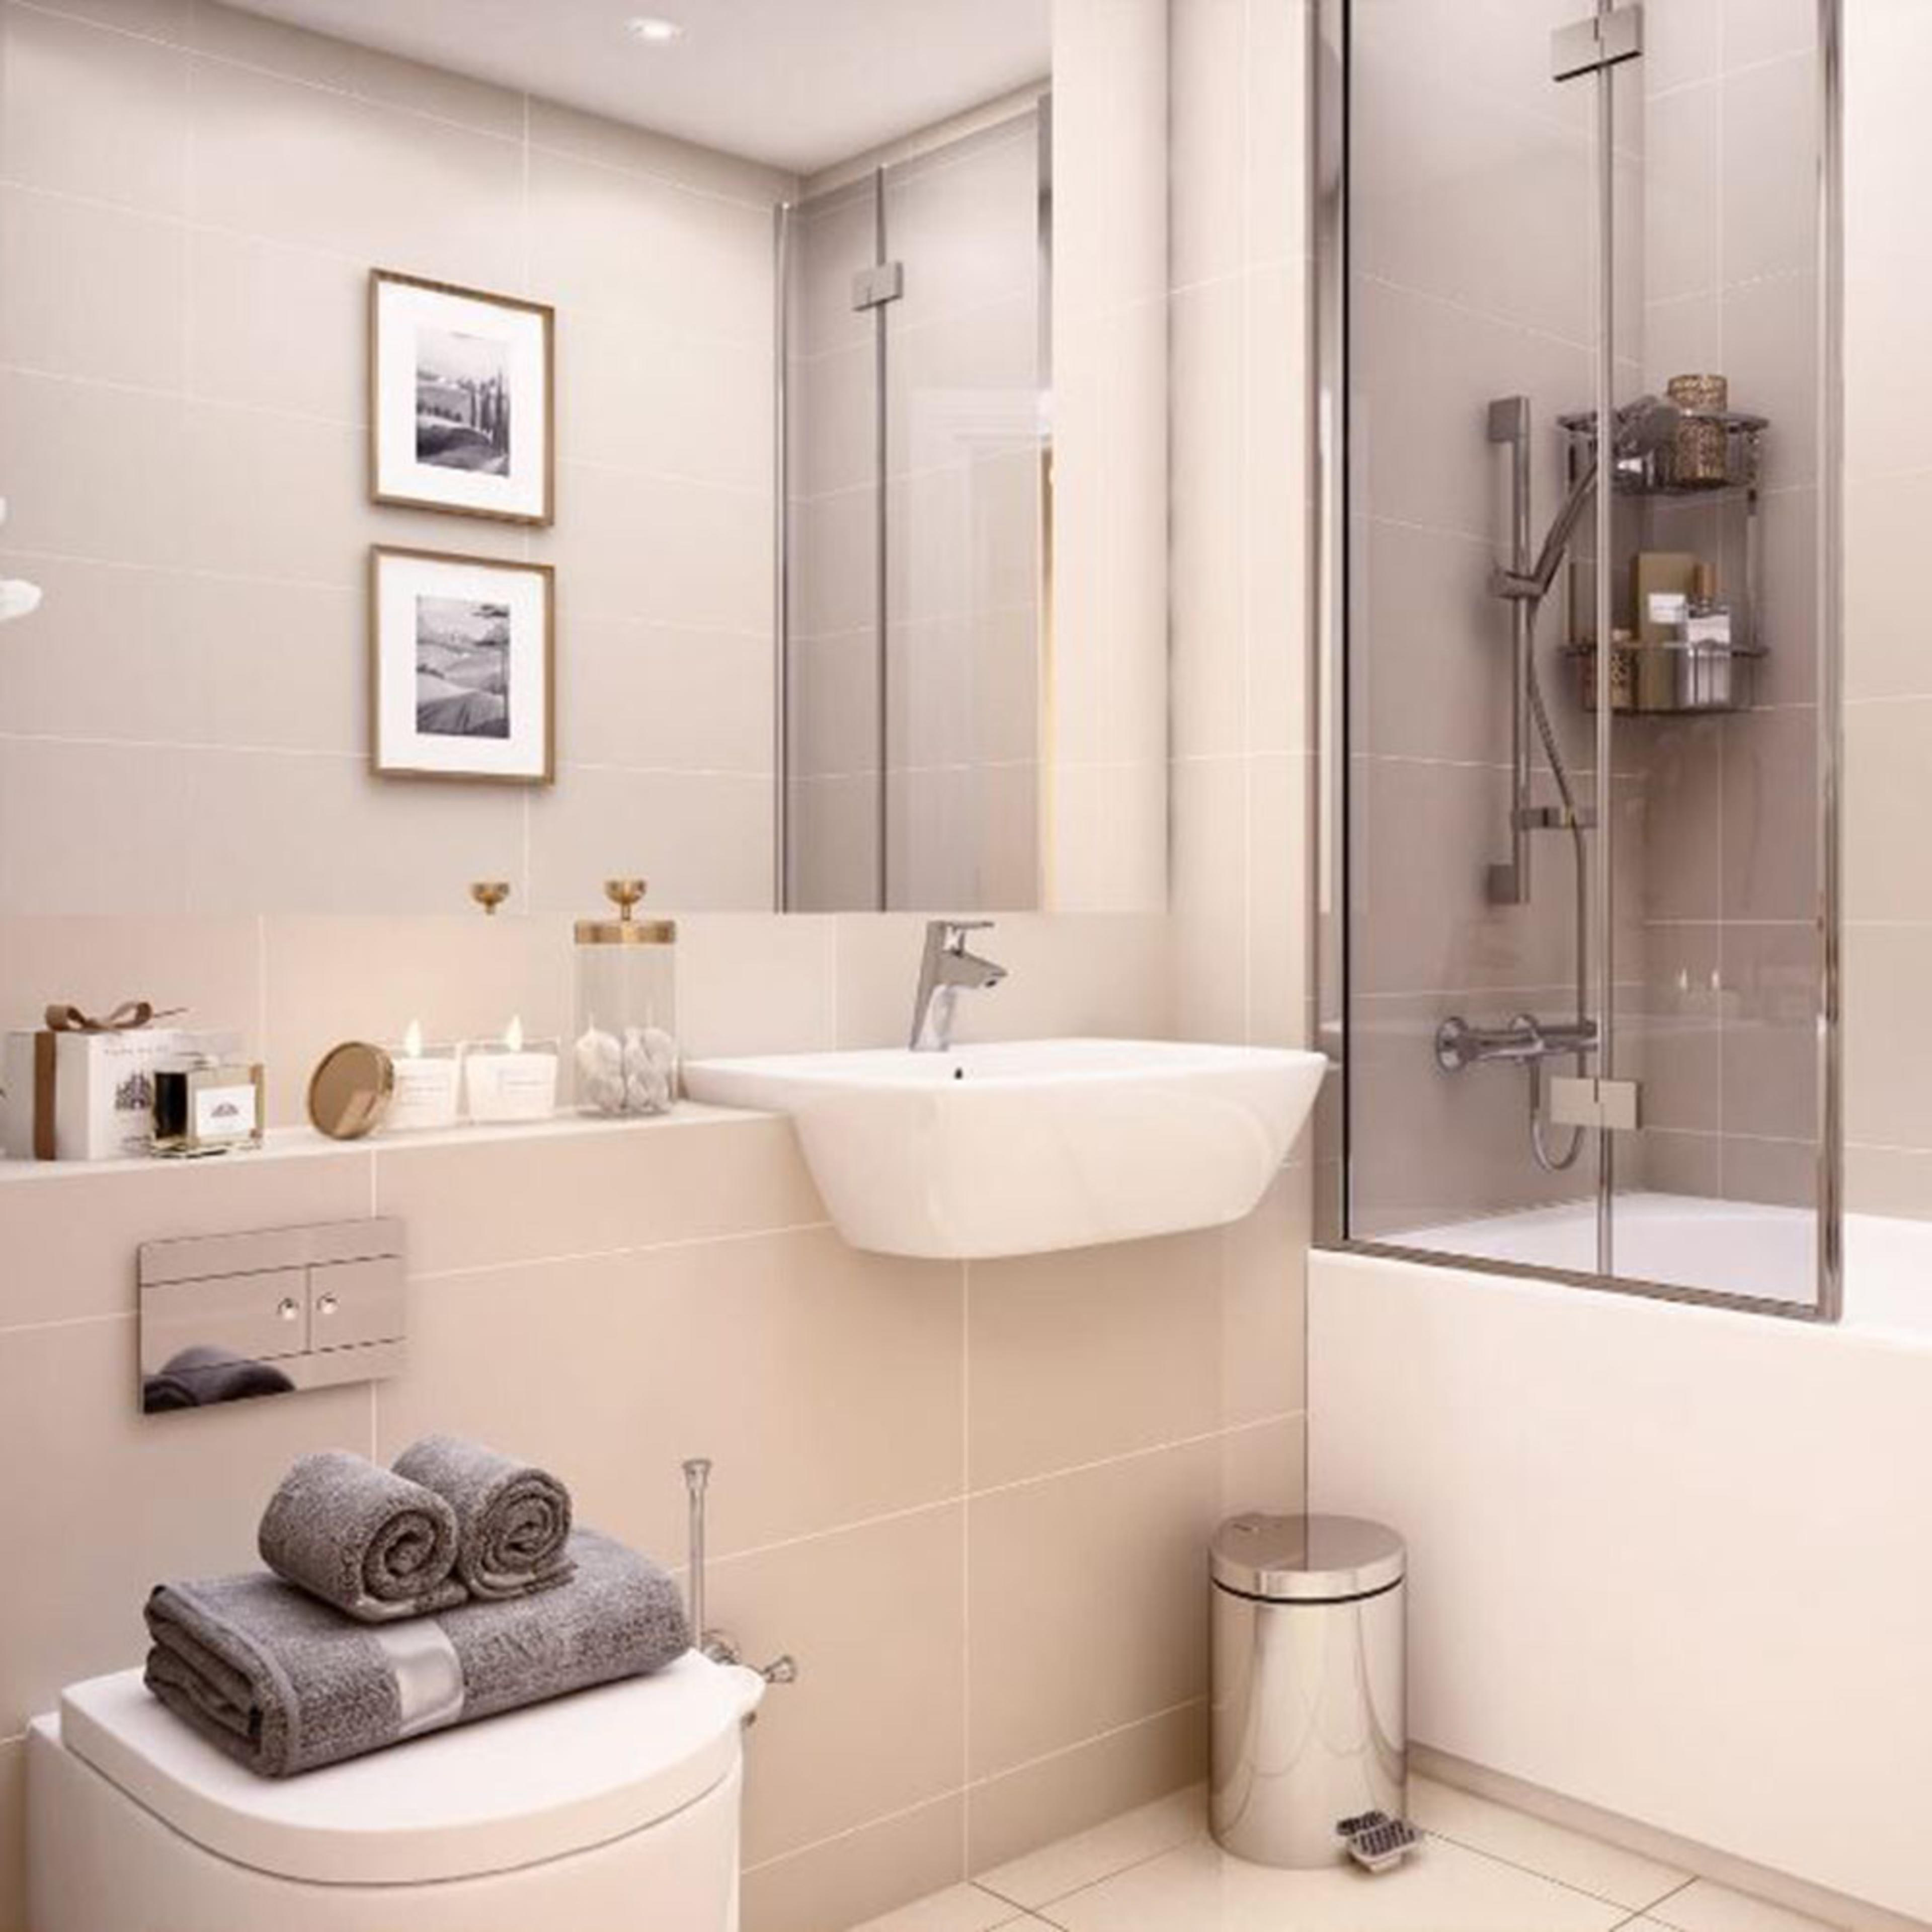 persona-homes-specification-bathroom-white-fittings-shower-screen-beige-tiles